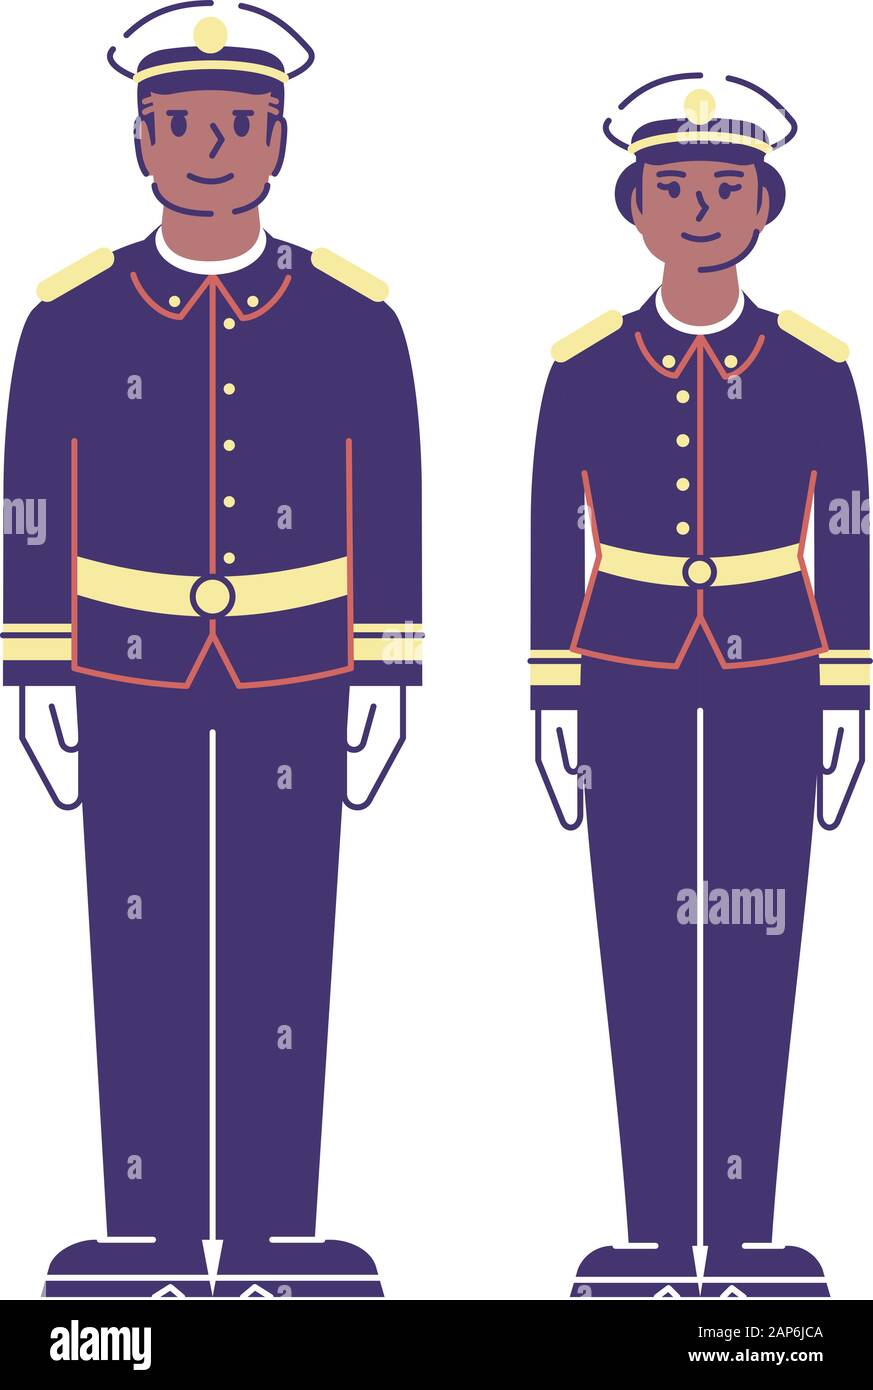 Army service workers flat vector characters. US soldiers standing at attention in festive uniform cartoon illustration with outline. African american Stock Vector